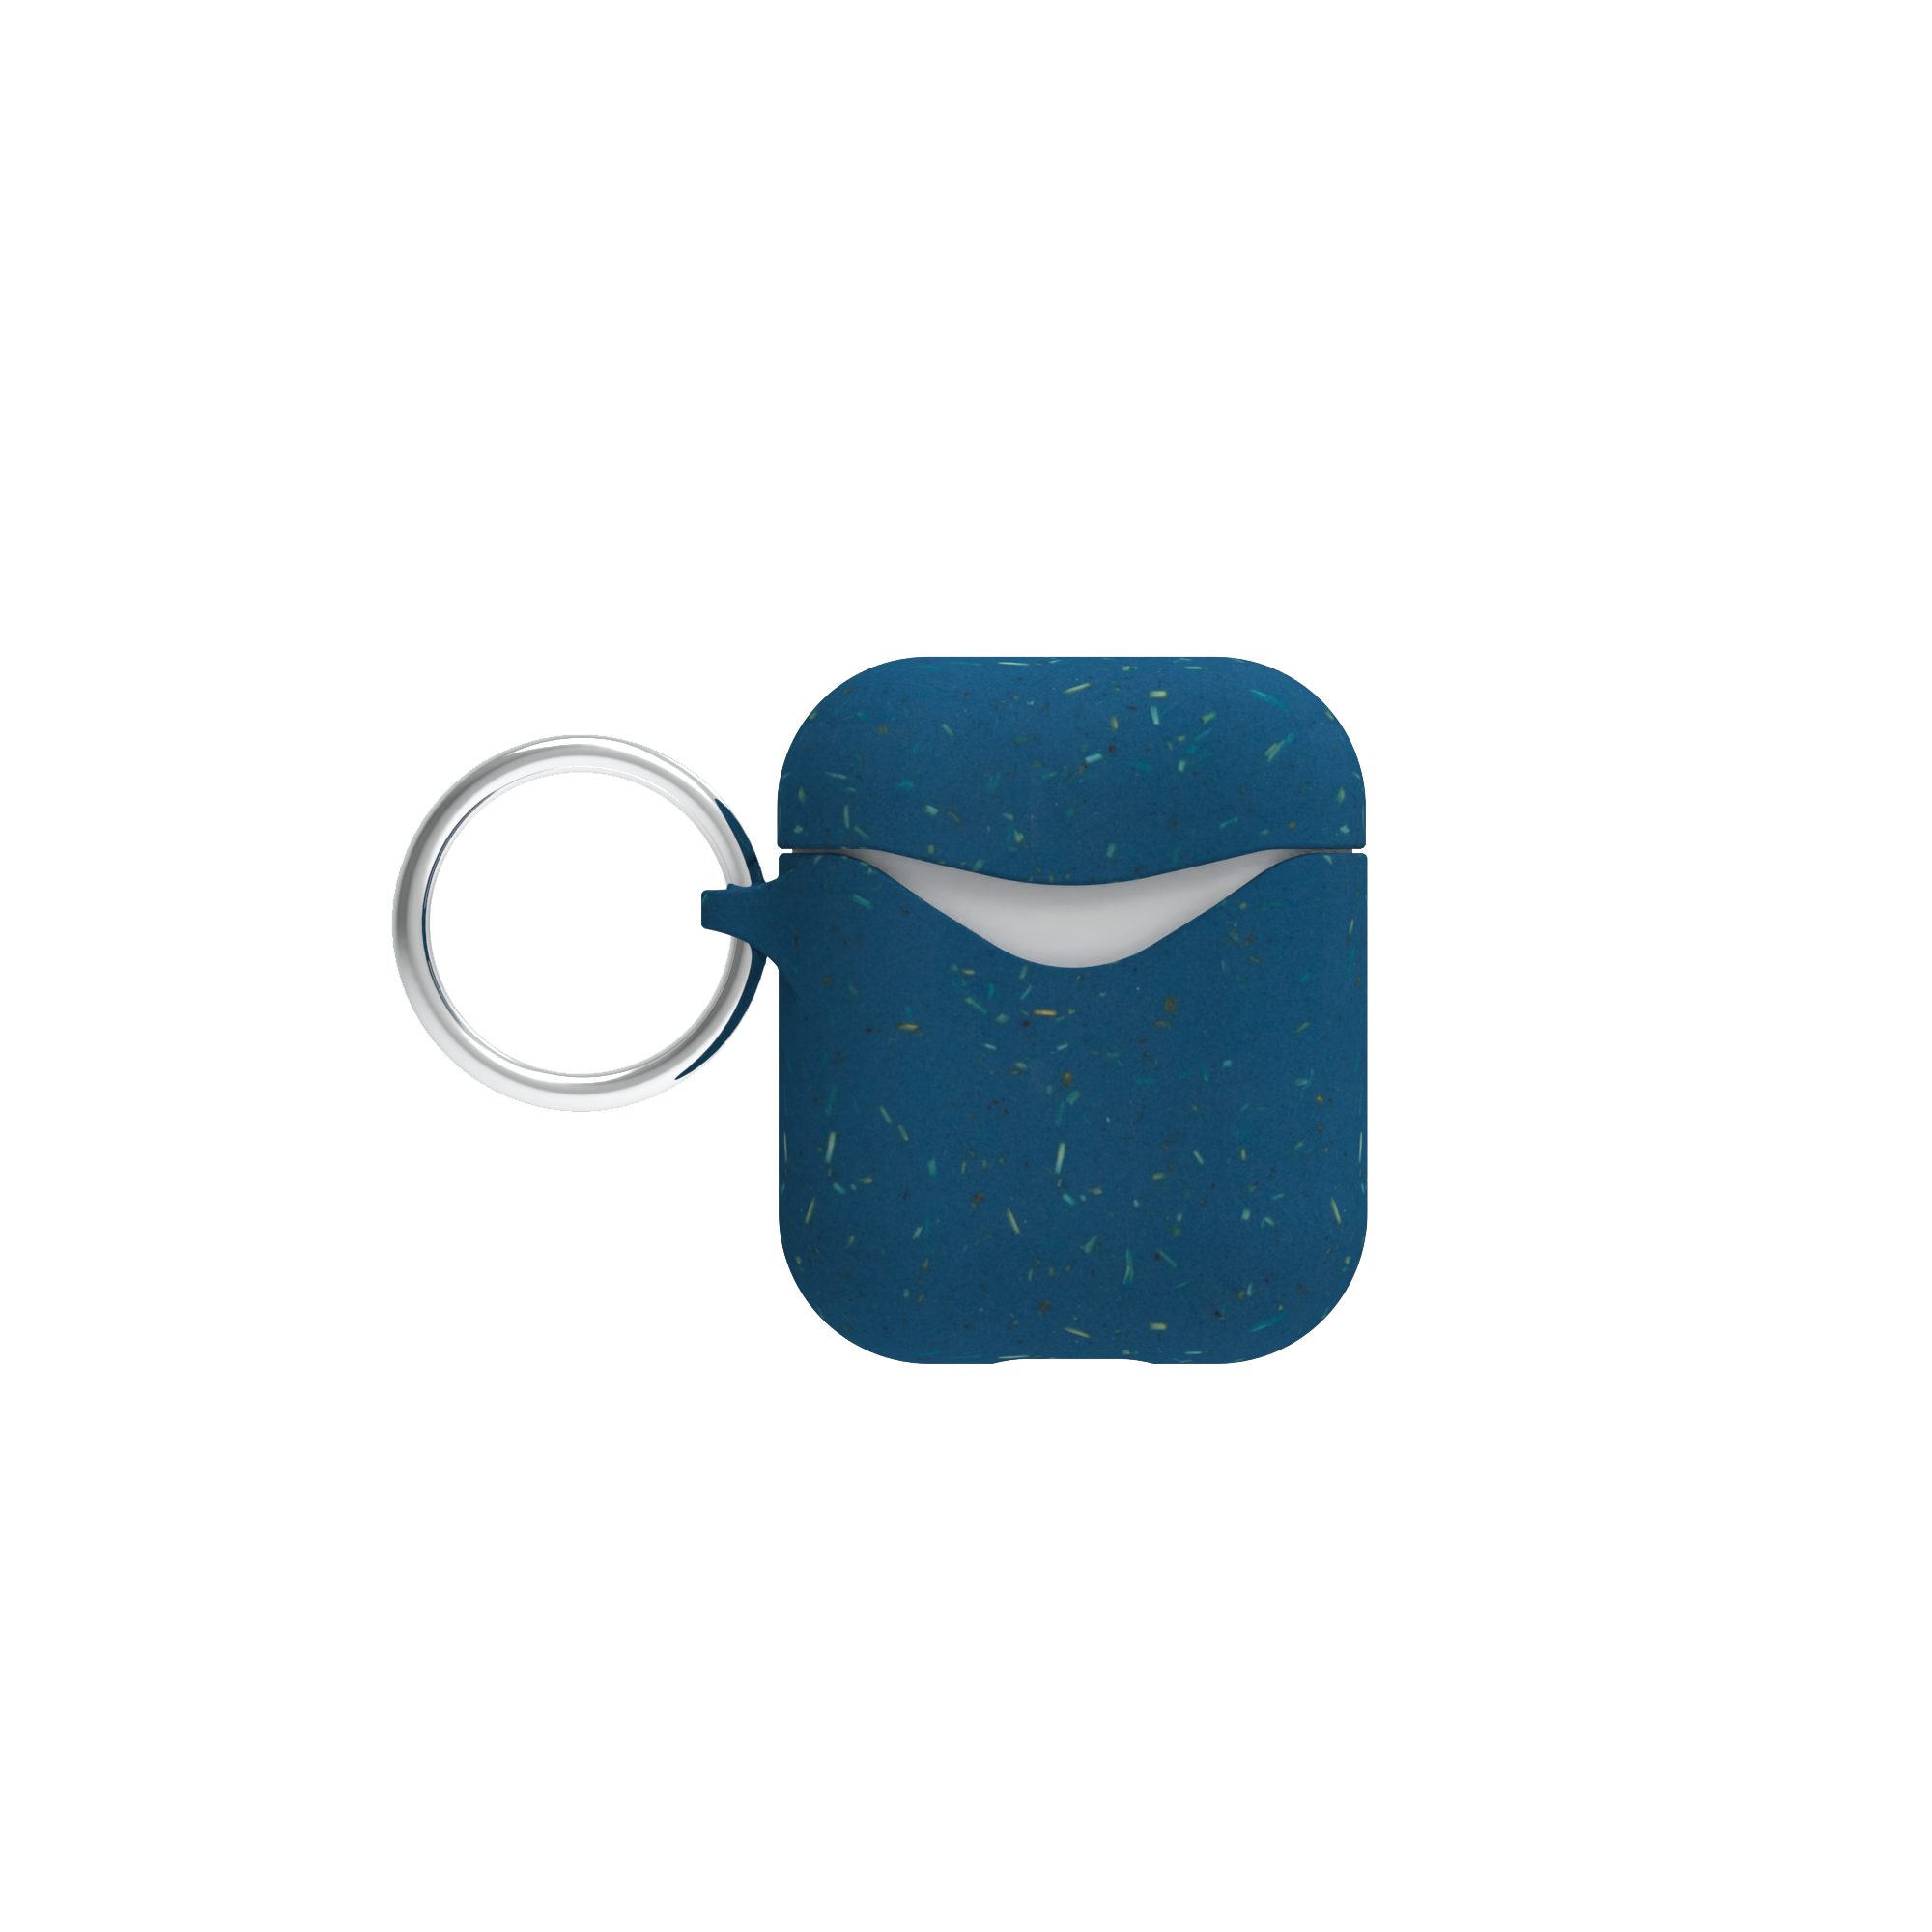 Blue AirTag case with keyring on a white background.